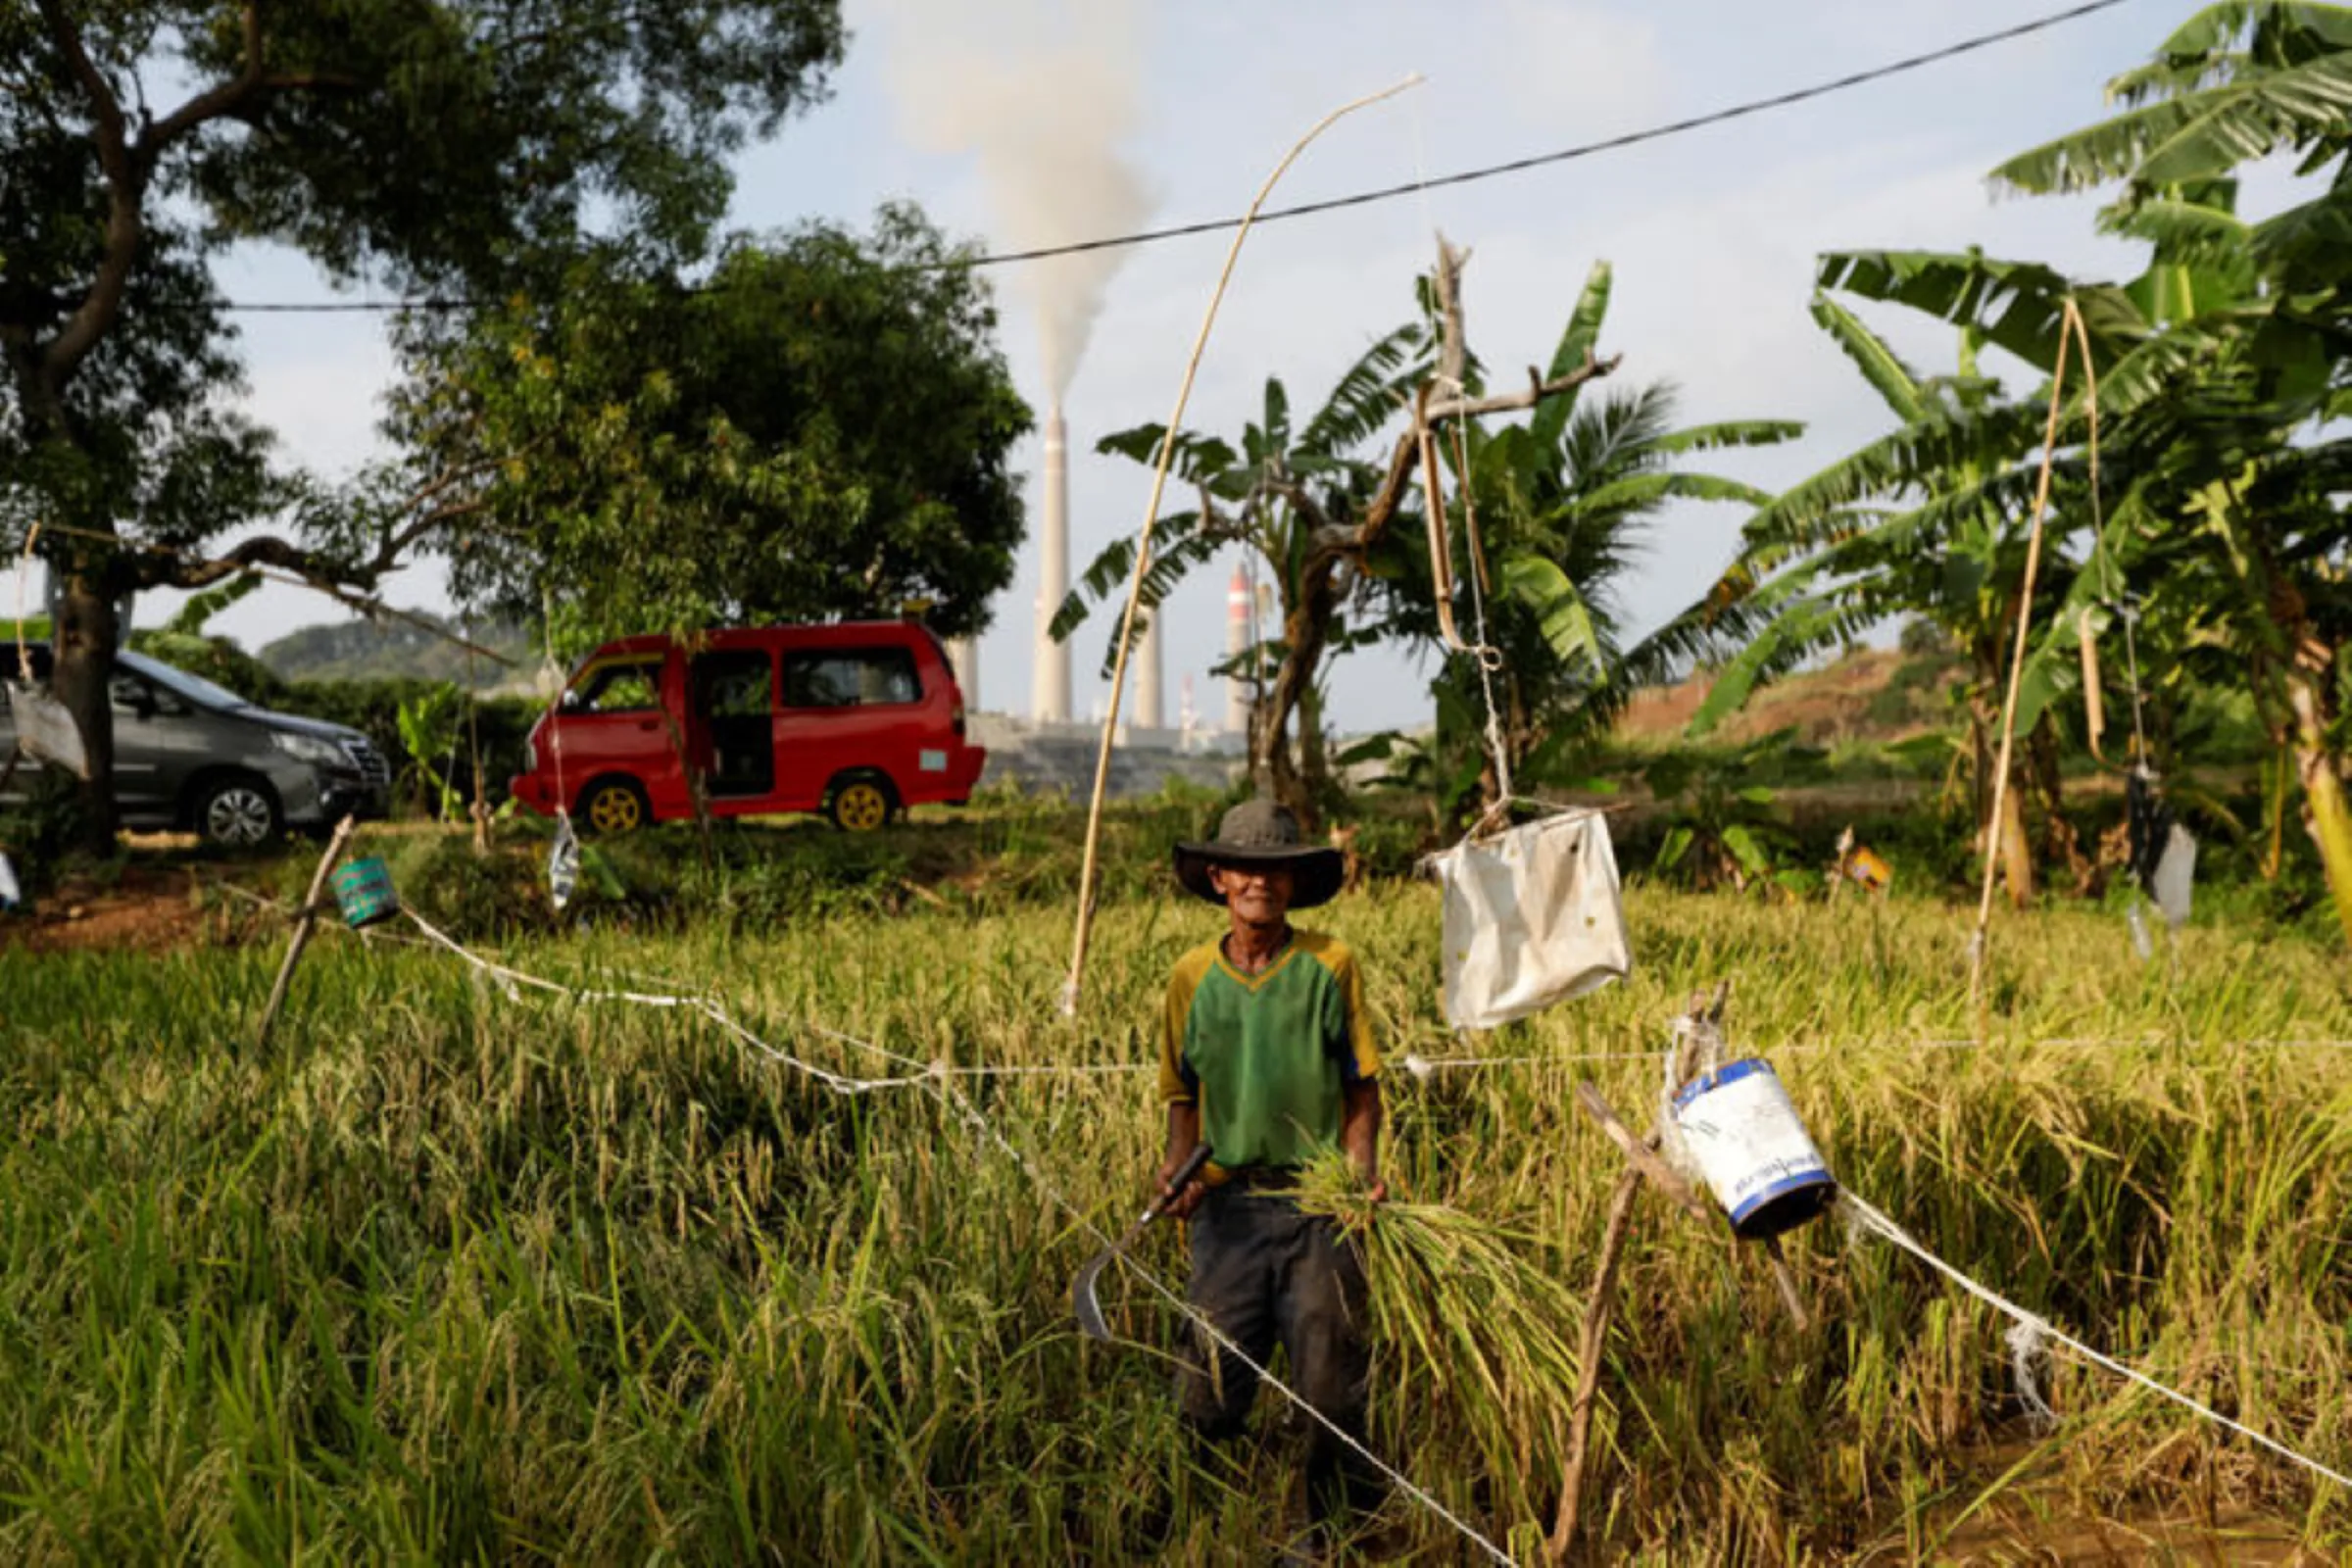 A local farmer looks on as he works on a paddy field at a village near a coal-fired power plant owned by Indonesia Power in Suralaya, Banten province, Indonesia, July 11, 2020